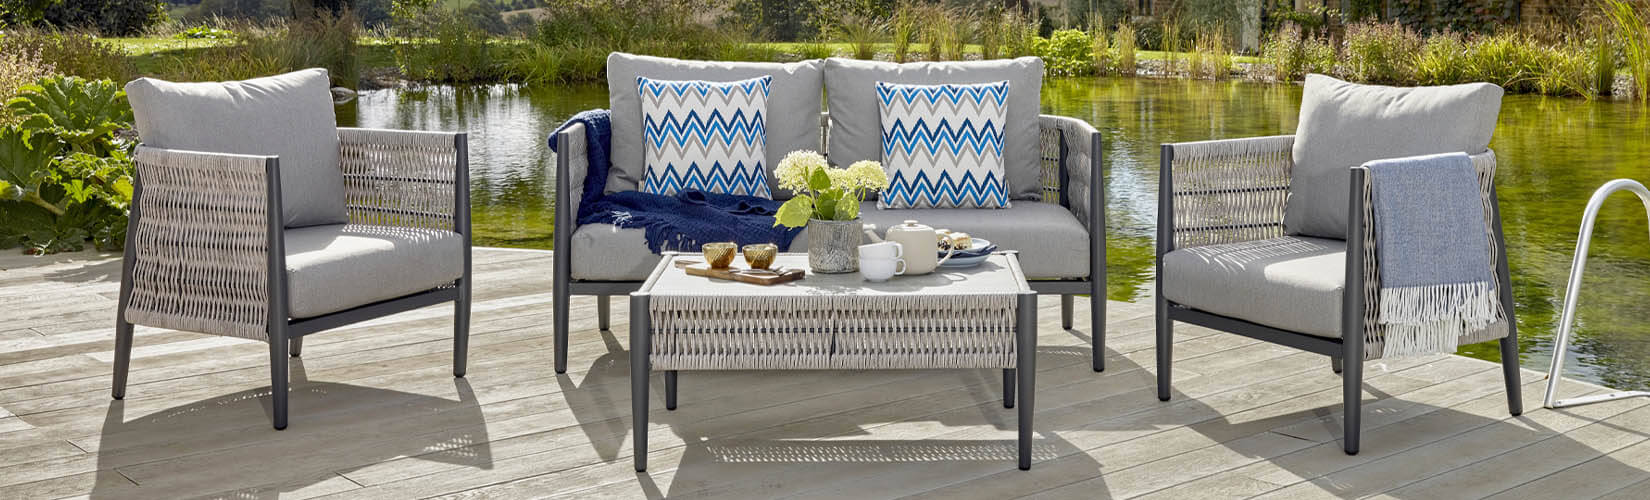 Buyers Guide: Selecting the Best Outdoor Furniture For Your Garden